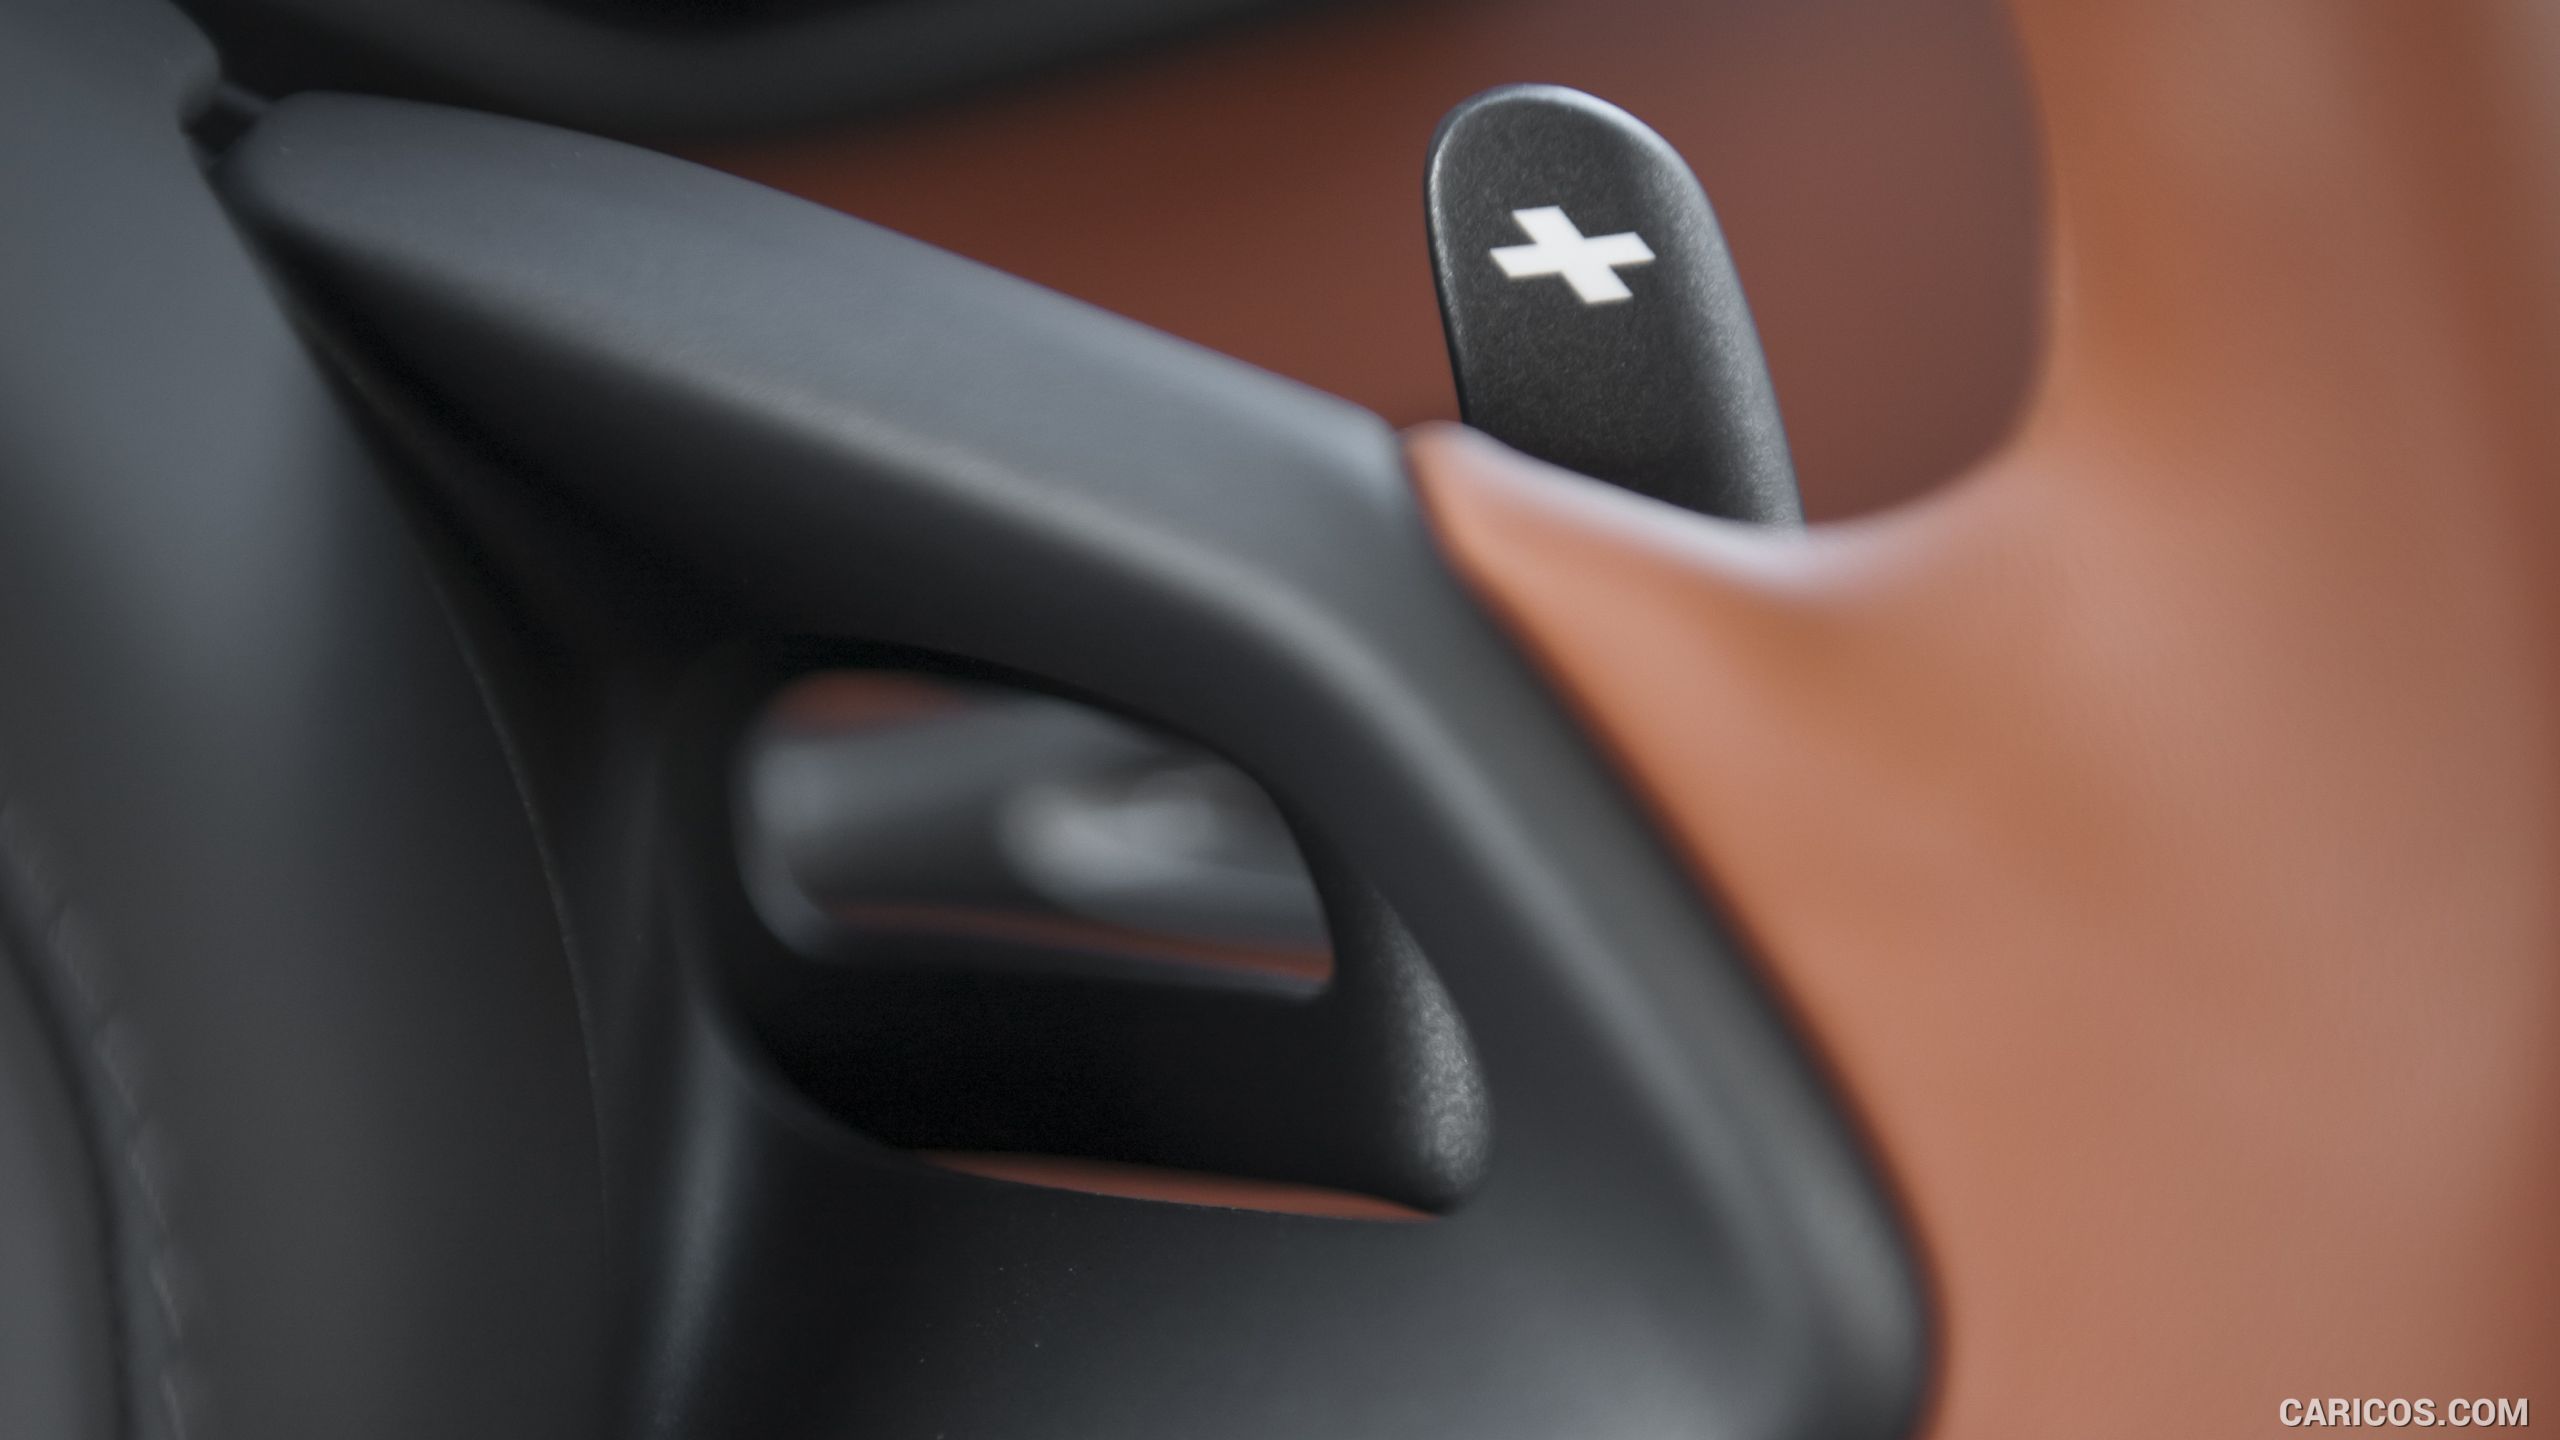 2016 McLaren 570S Coupe - Paddle Shifters - Interior, Detail, #183 of 192